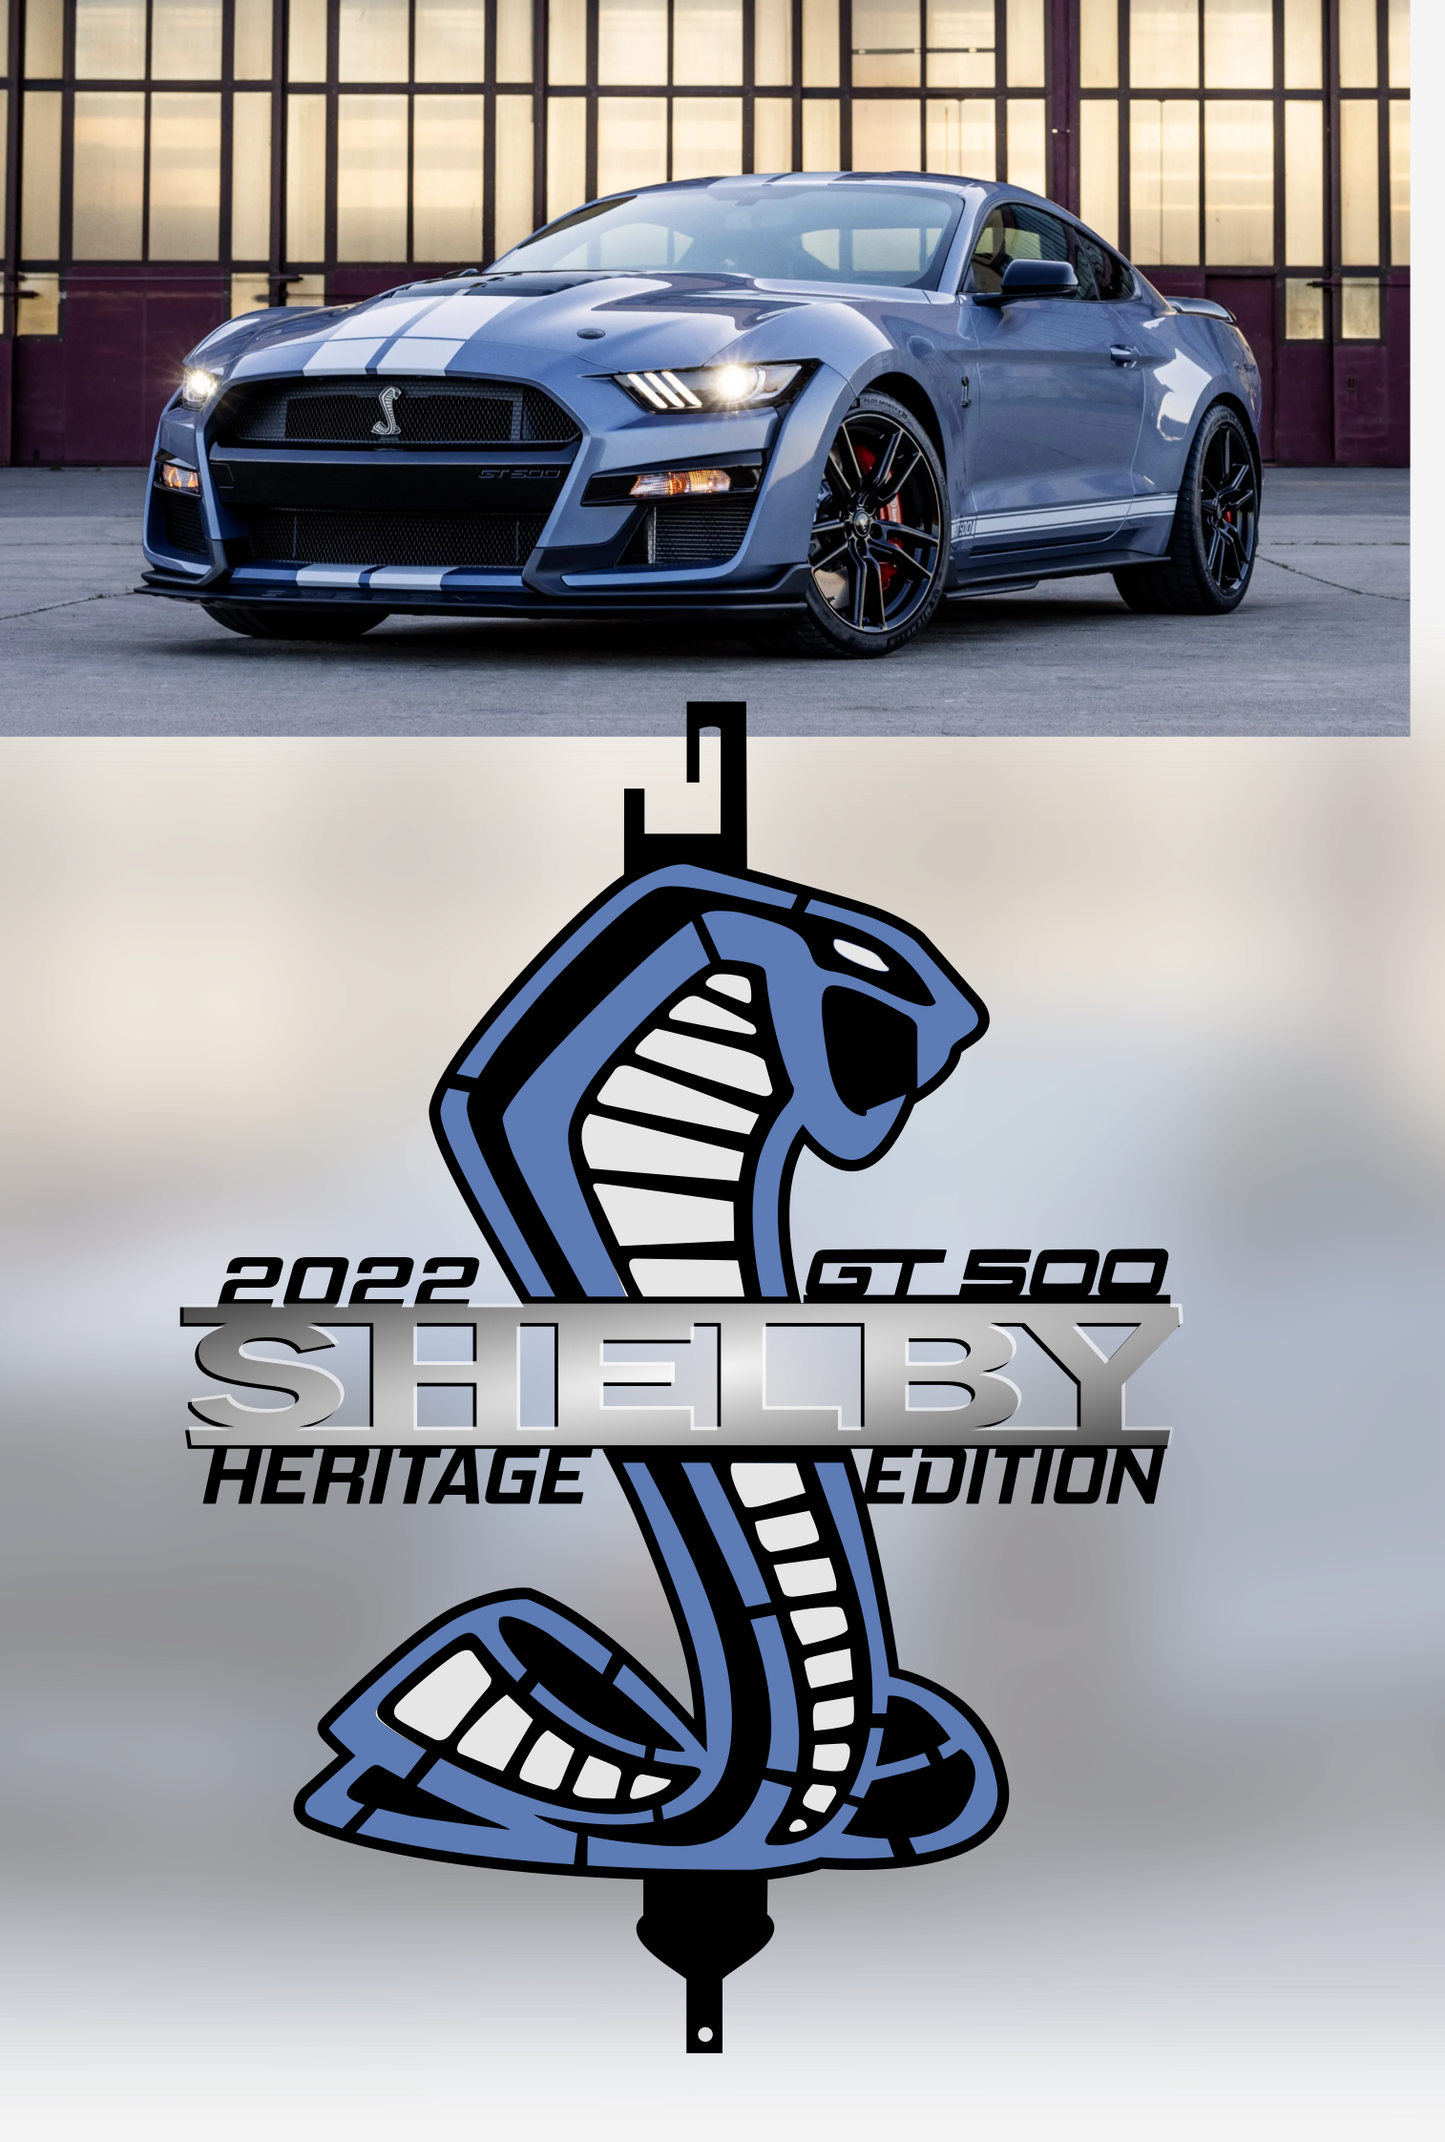 Shelby heritage edition  gt500 hood prop, brittany blue / black / white wimbledon